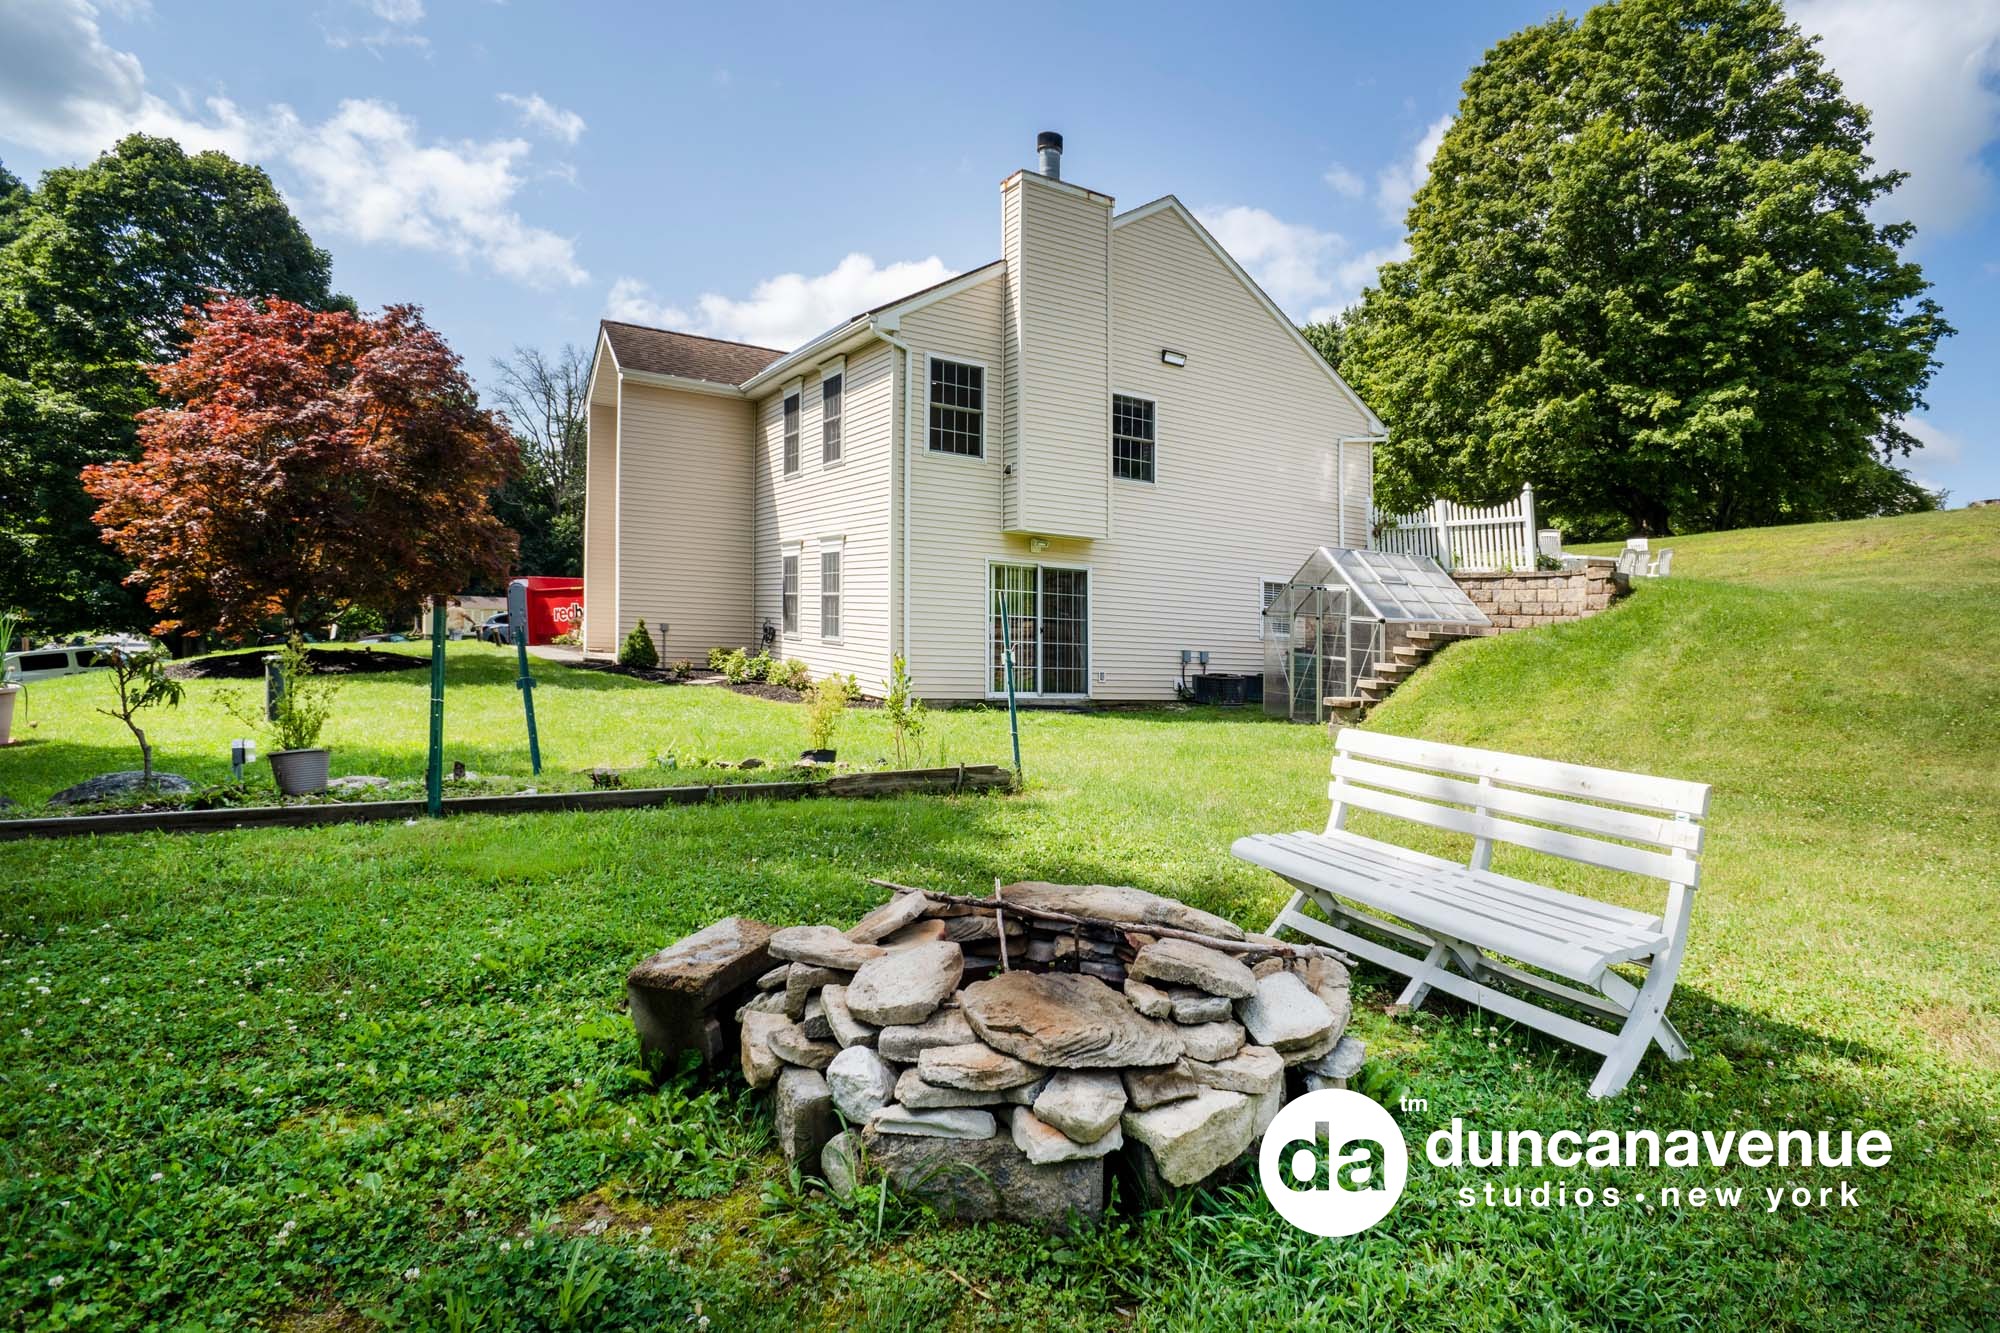 Real Estate Property Photography in Westchester County, NY – Duncan Avenue Studios – Real Estate and Aerial Drone Photography in Catskills, Hudson Valley and Westchester, New York